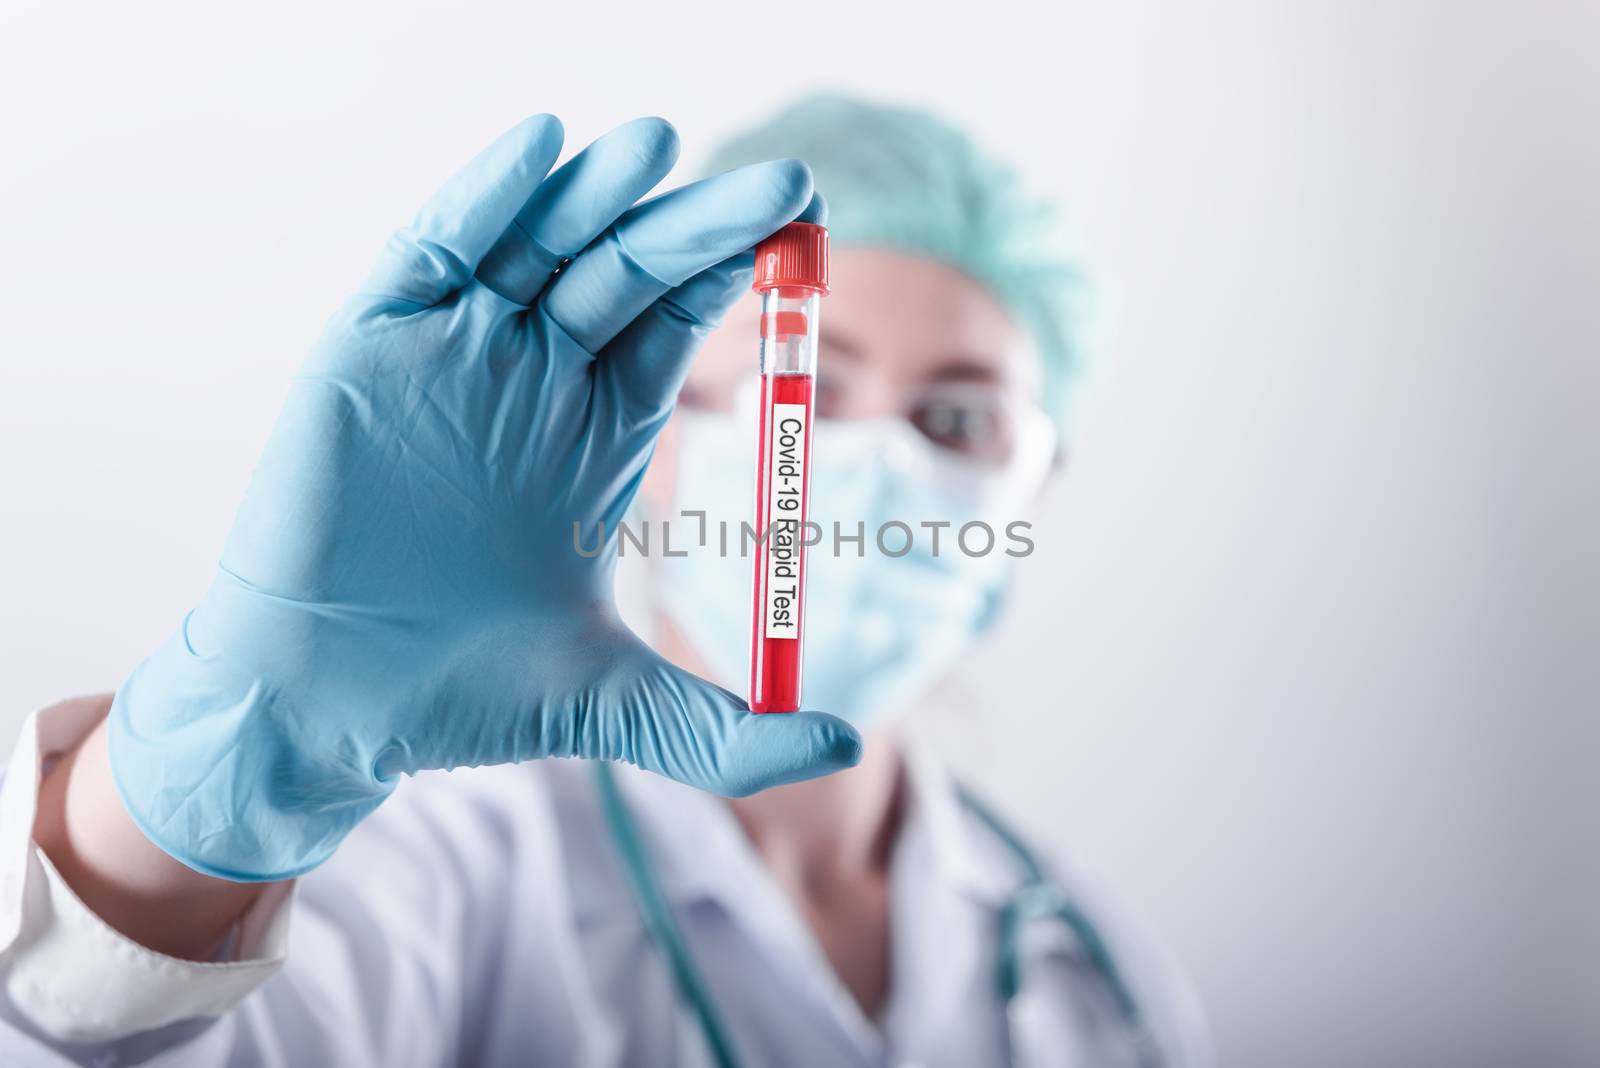 Coronavirus Covid-19 Lab Rapid Sample Test Concept, Medical Laboratory or Doctor Analyzing Corona Virus Patient Blood in Hospital Laboratory Room. Covid19 Diagnostics and Medicine Clinical Health Care